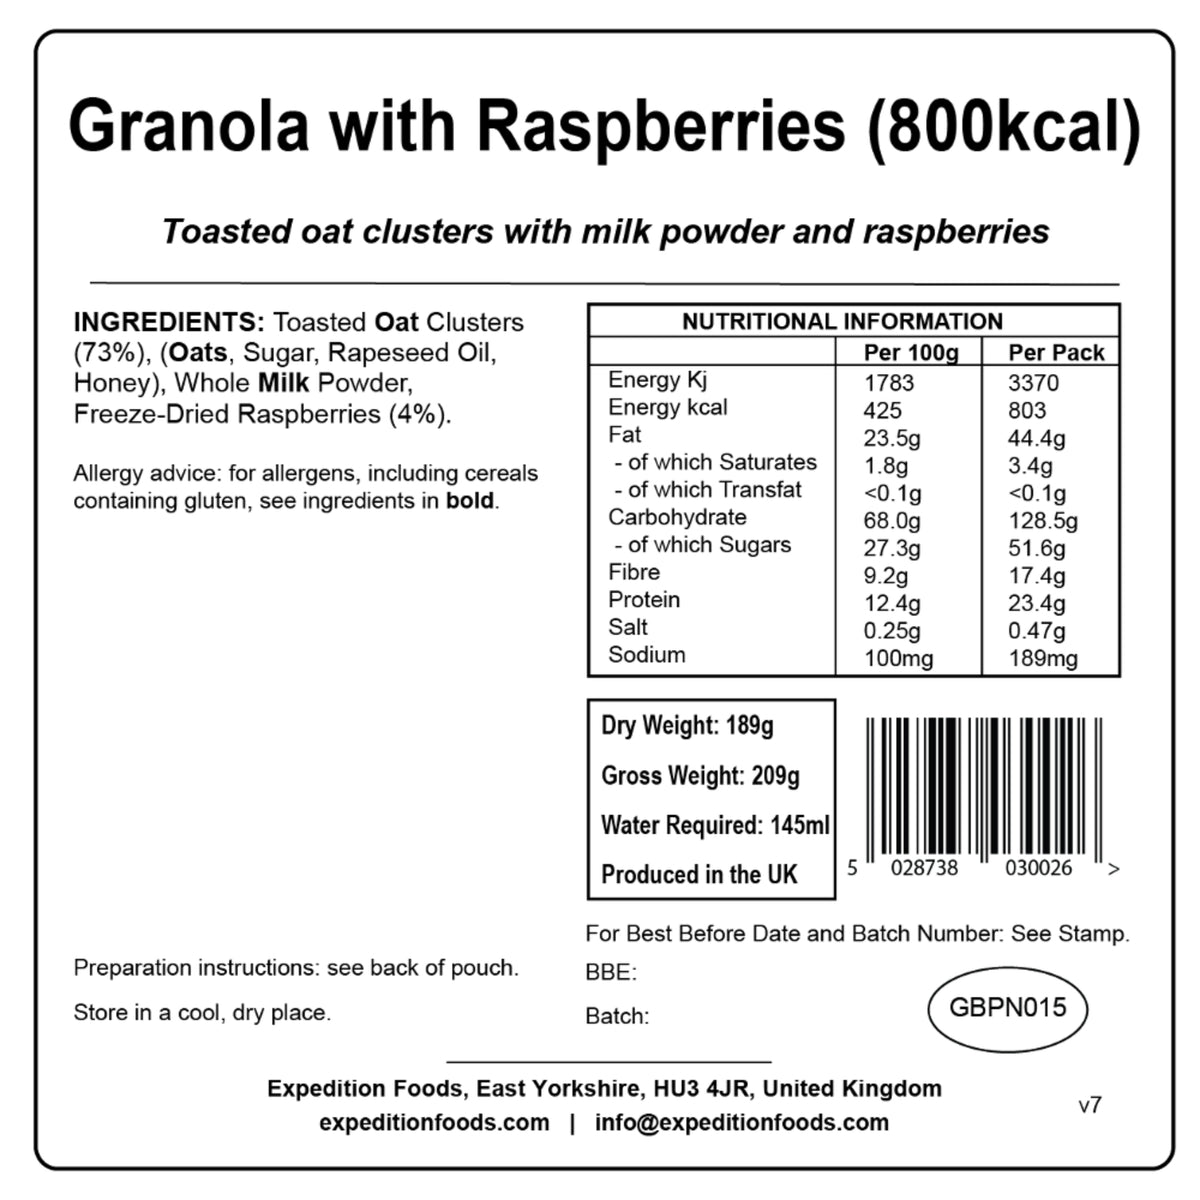 Expedition Foods Granola with Raspberries (800kcal)